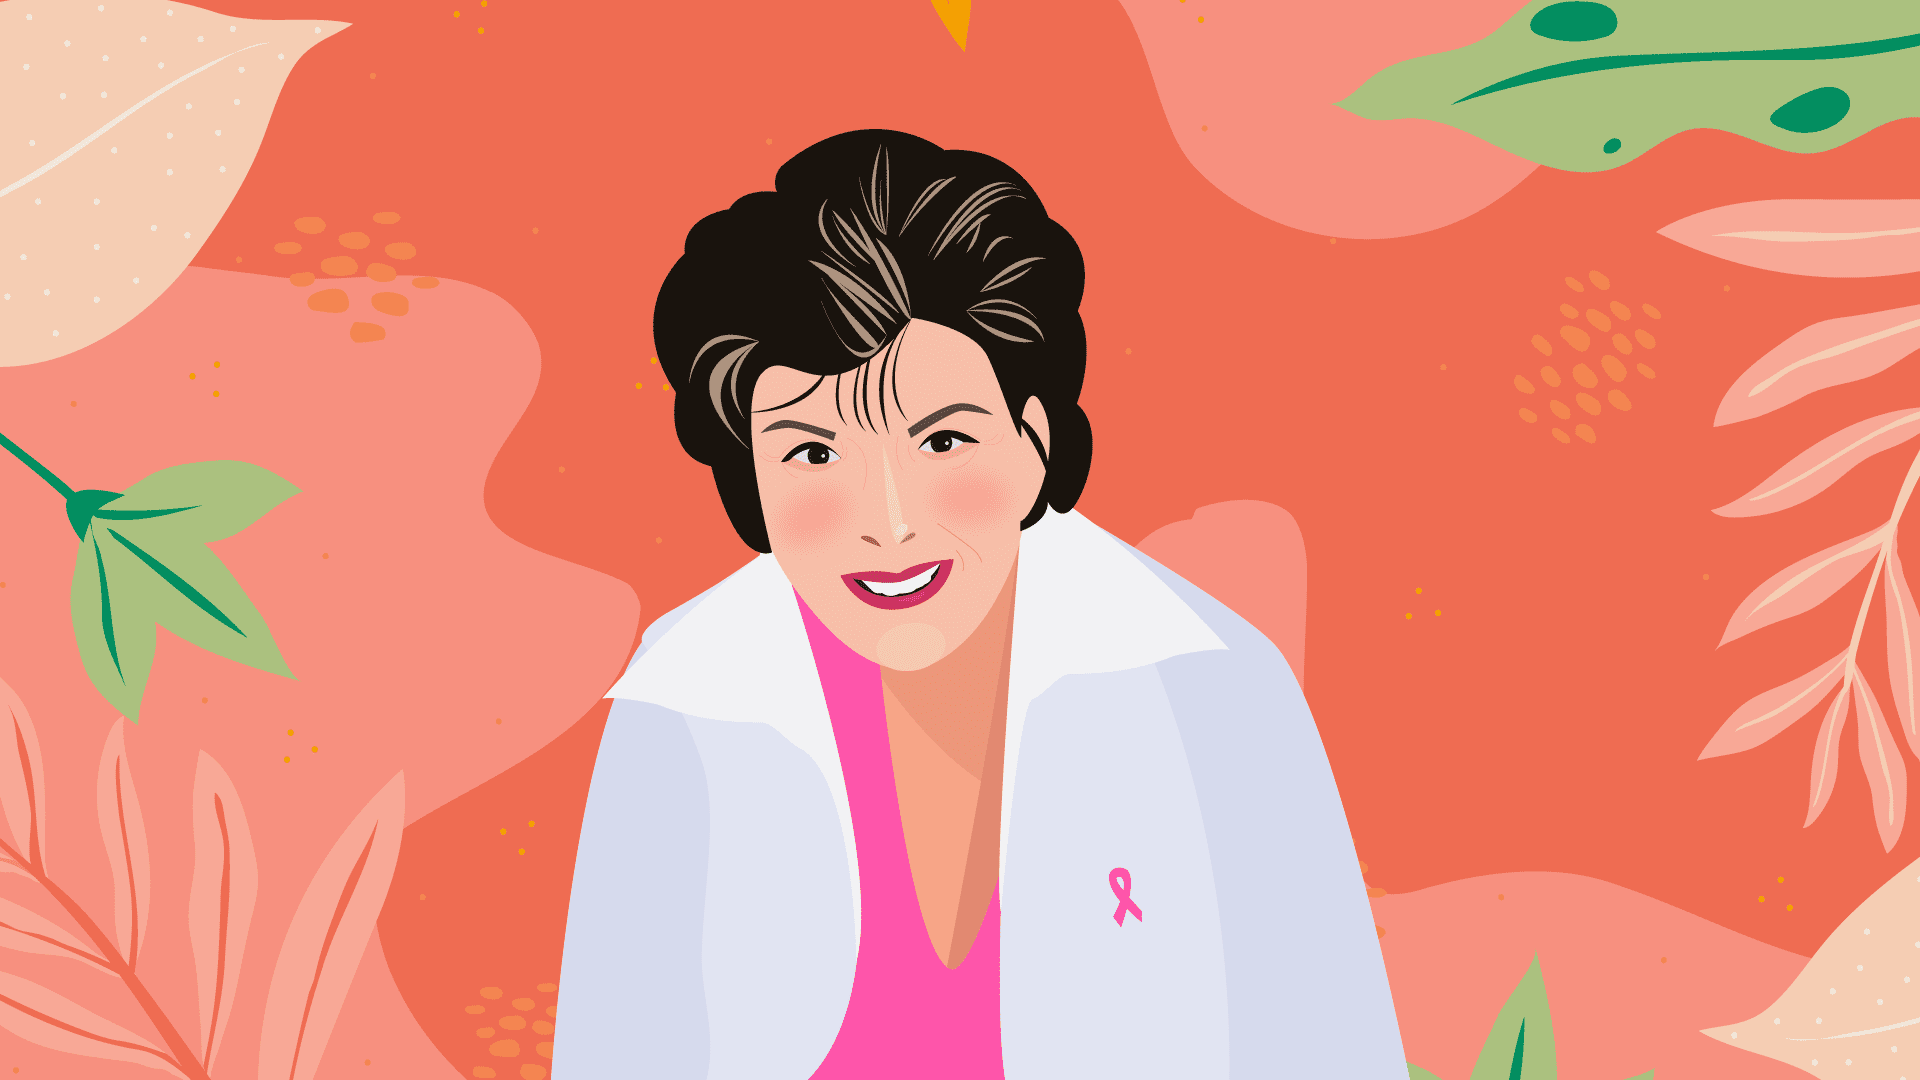 Cancer Survivor Janet Chambers